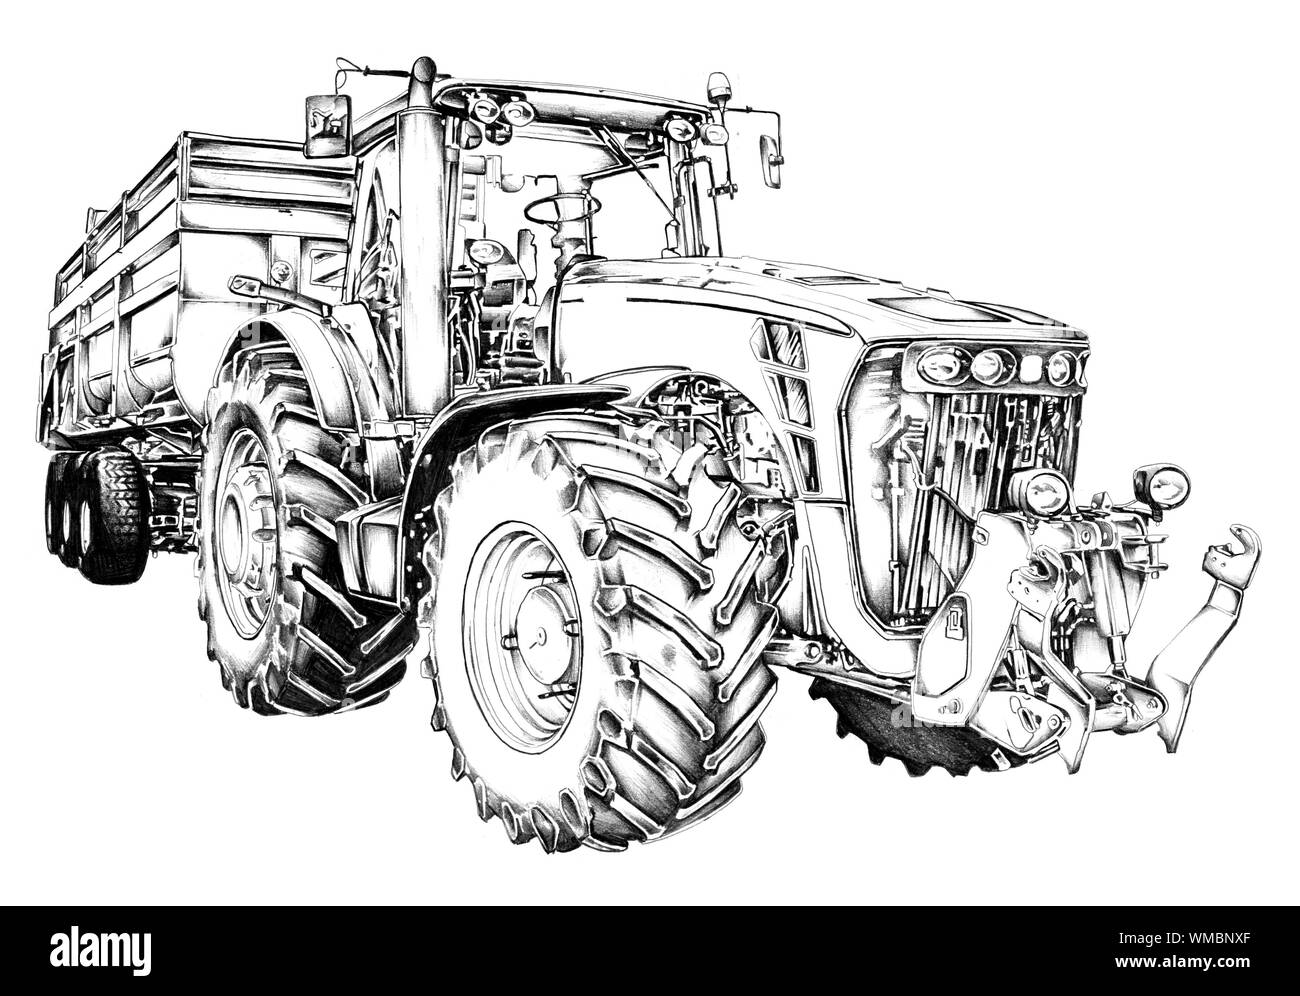 Agricultural tractor illustration art drawing stock photo